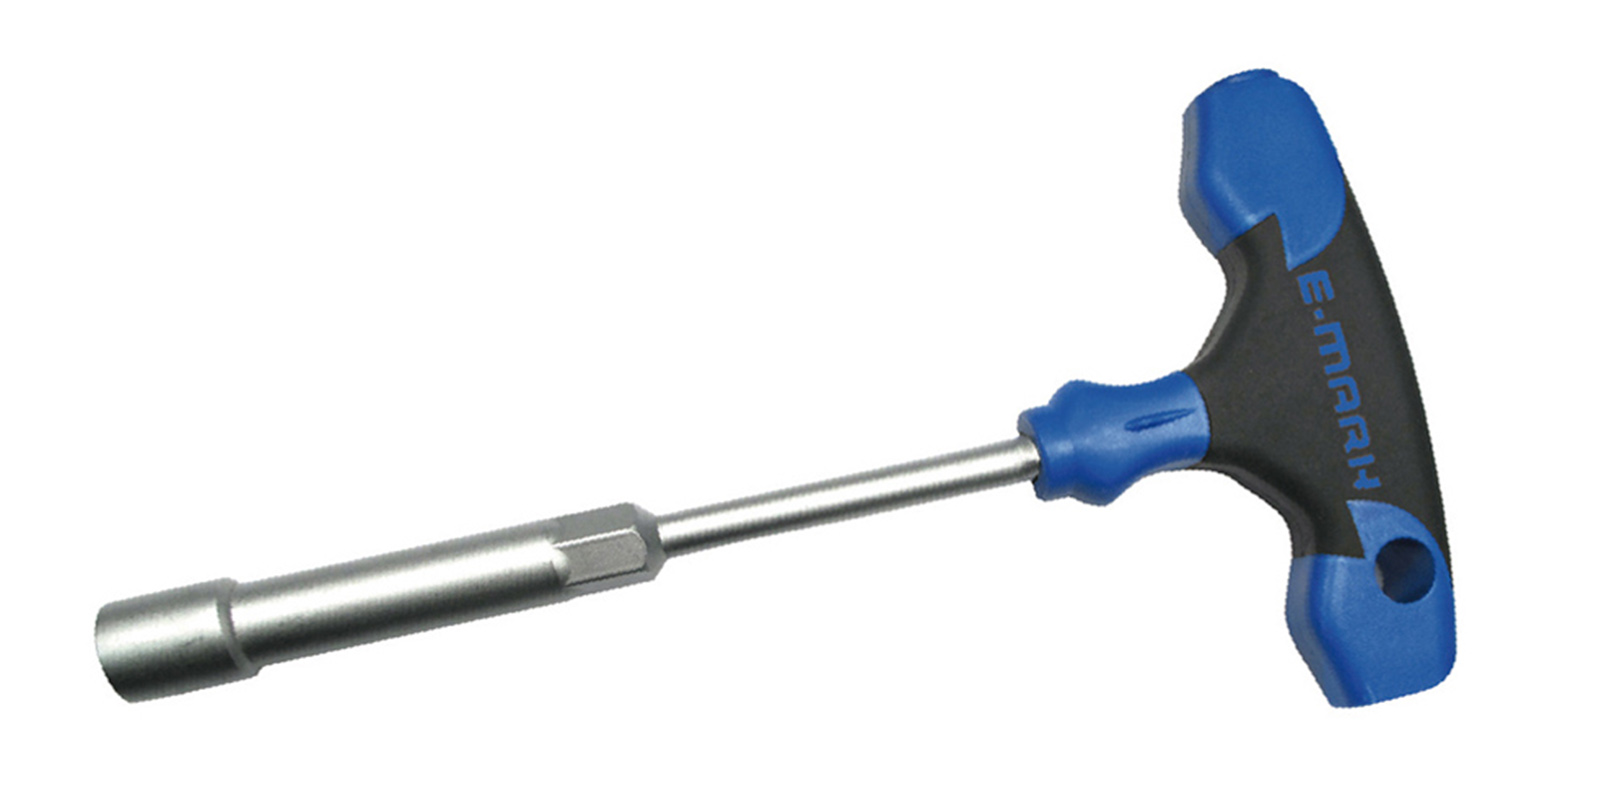 T-handle nut driver (nut spinner), 645 series